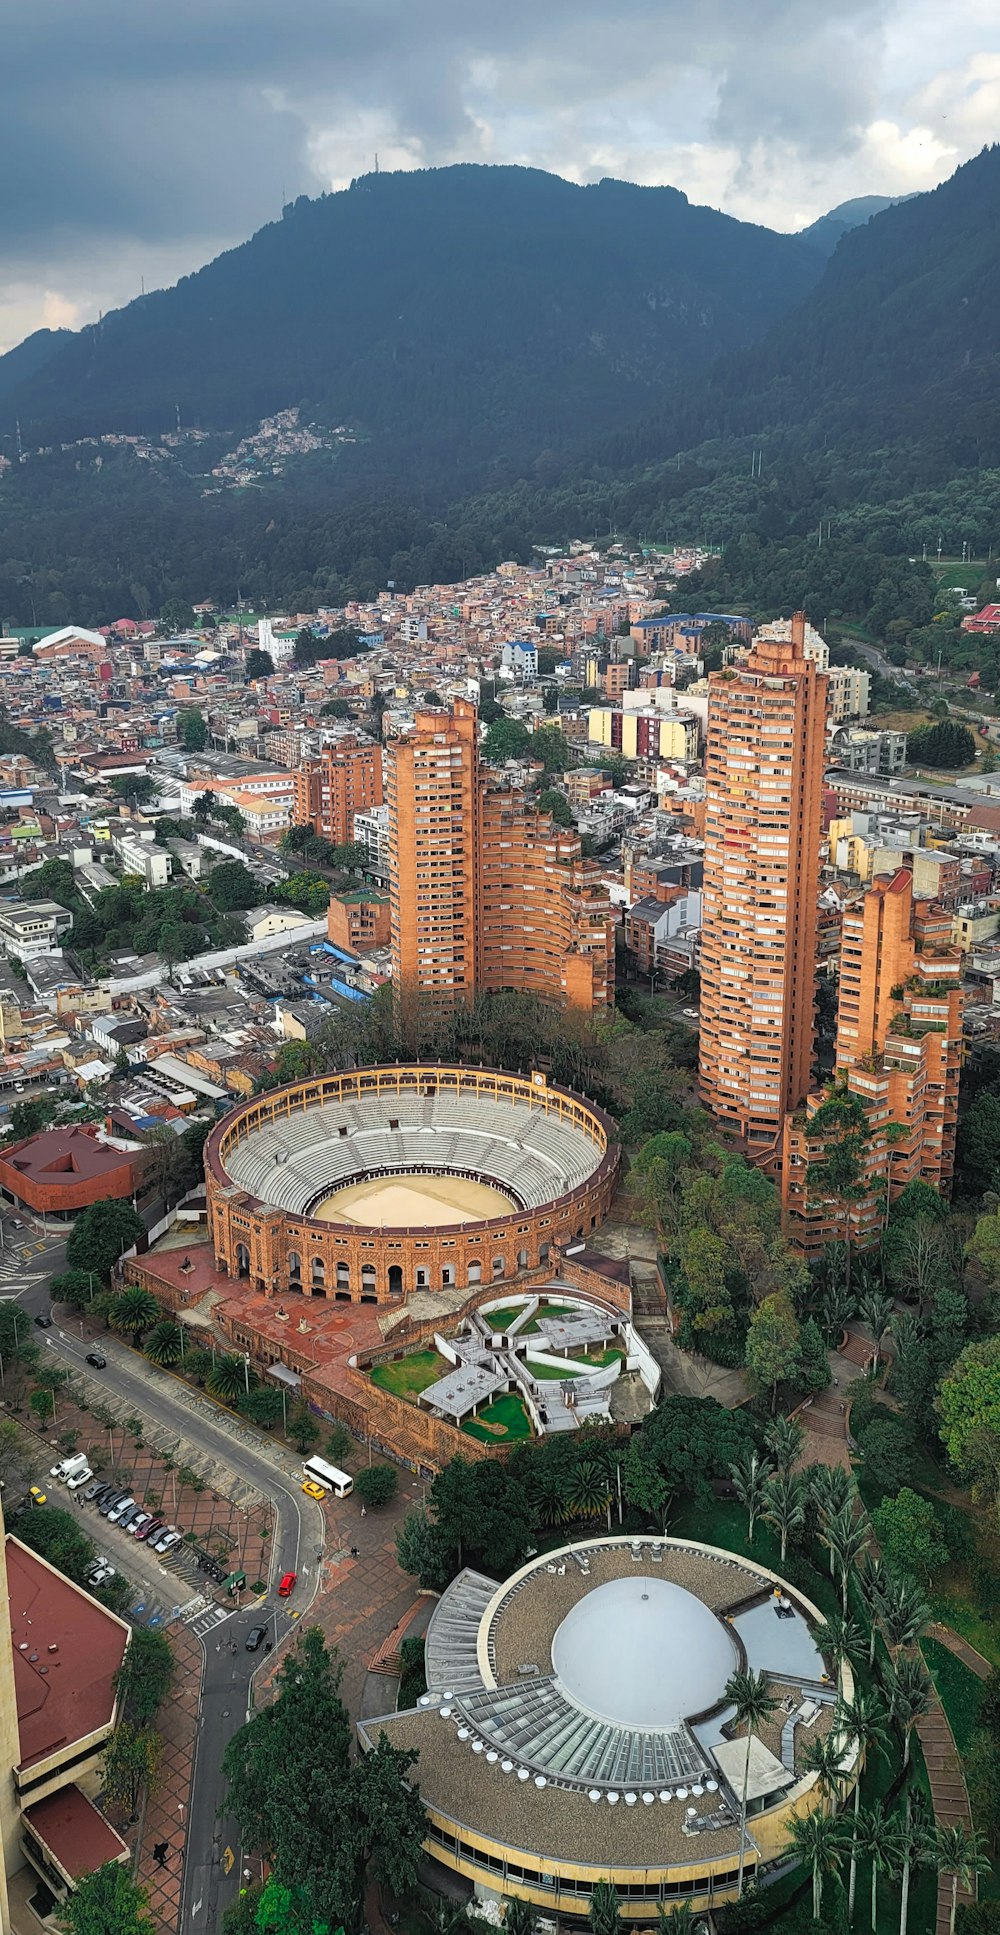 an aerial view of a city with mountains in the background